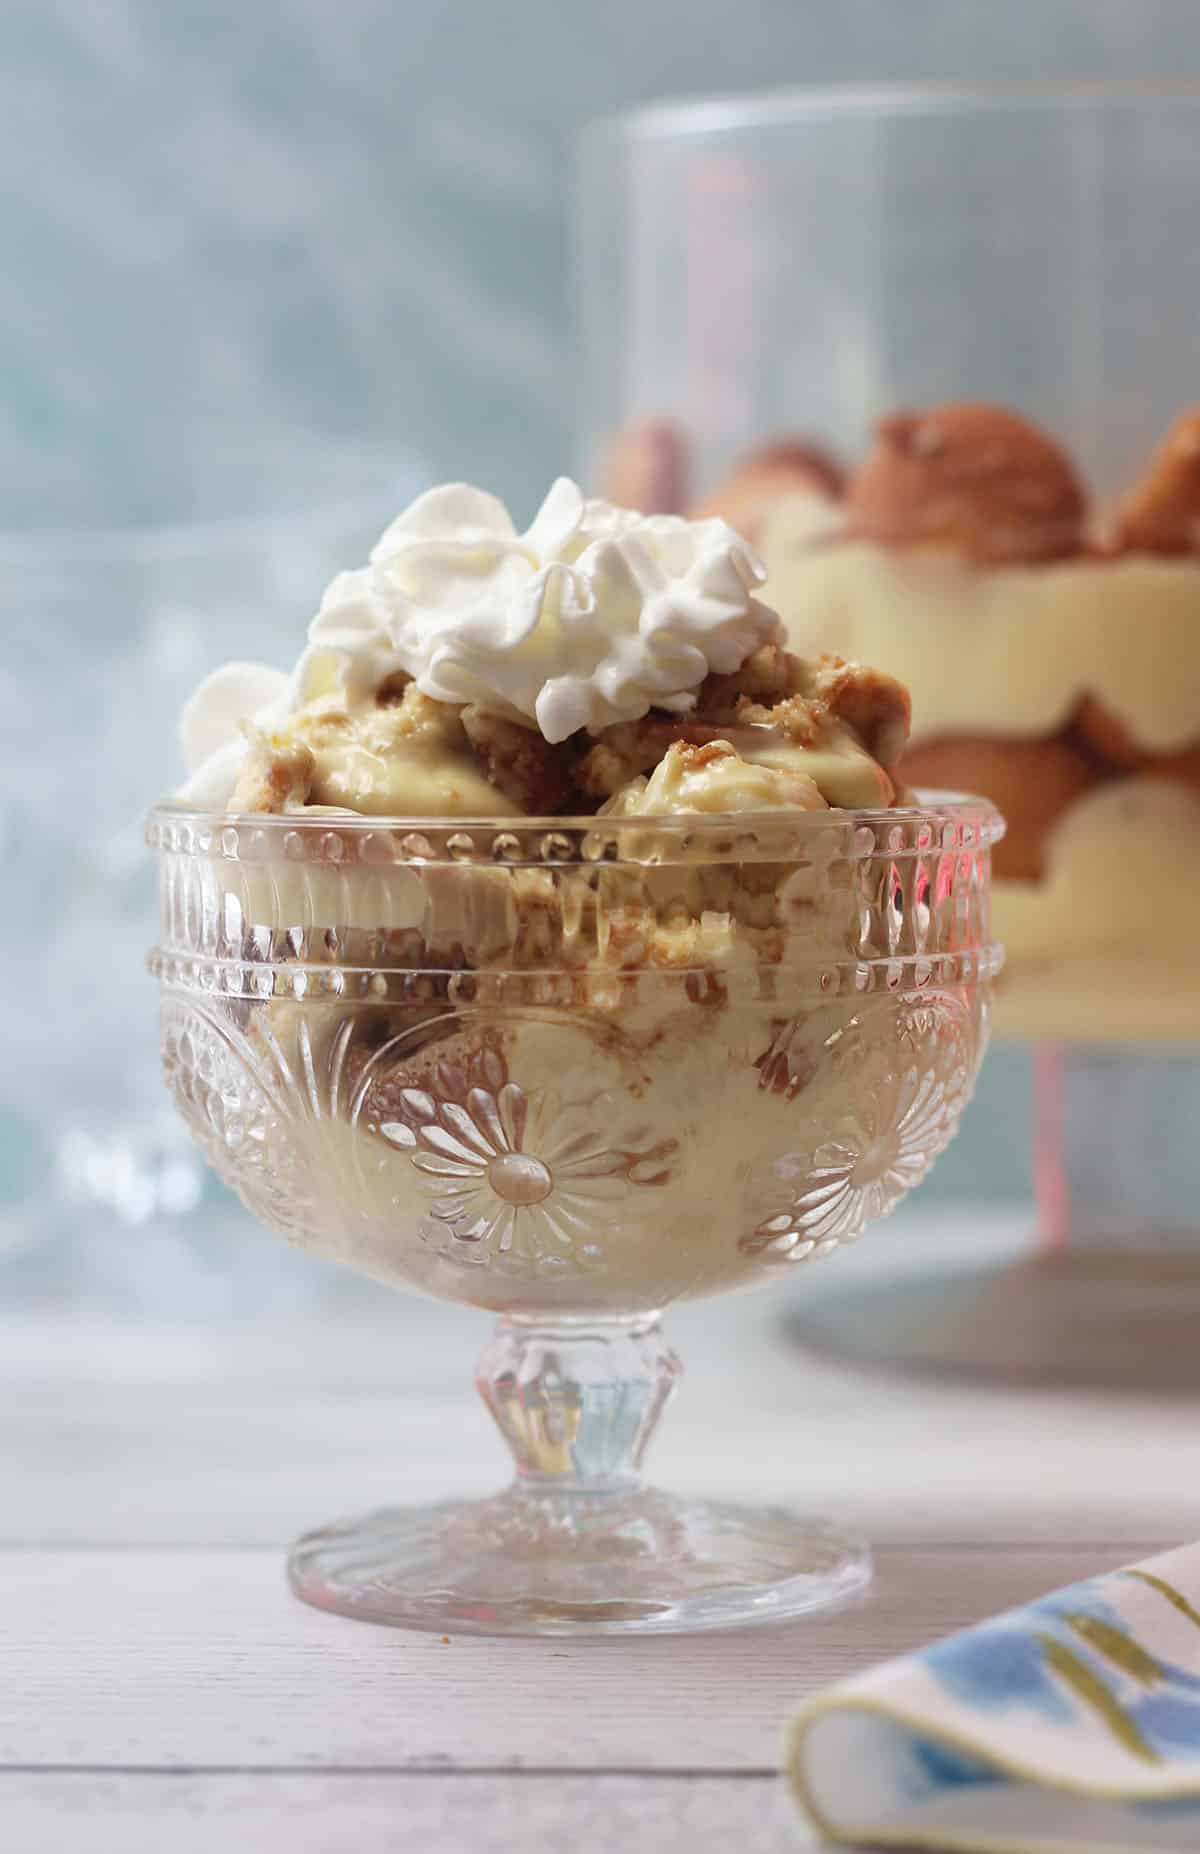 A glass bowl of banana pudding topped with whipped cream and cookie crumbles placed on a wooden table.